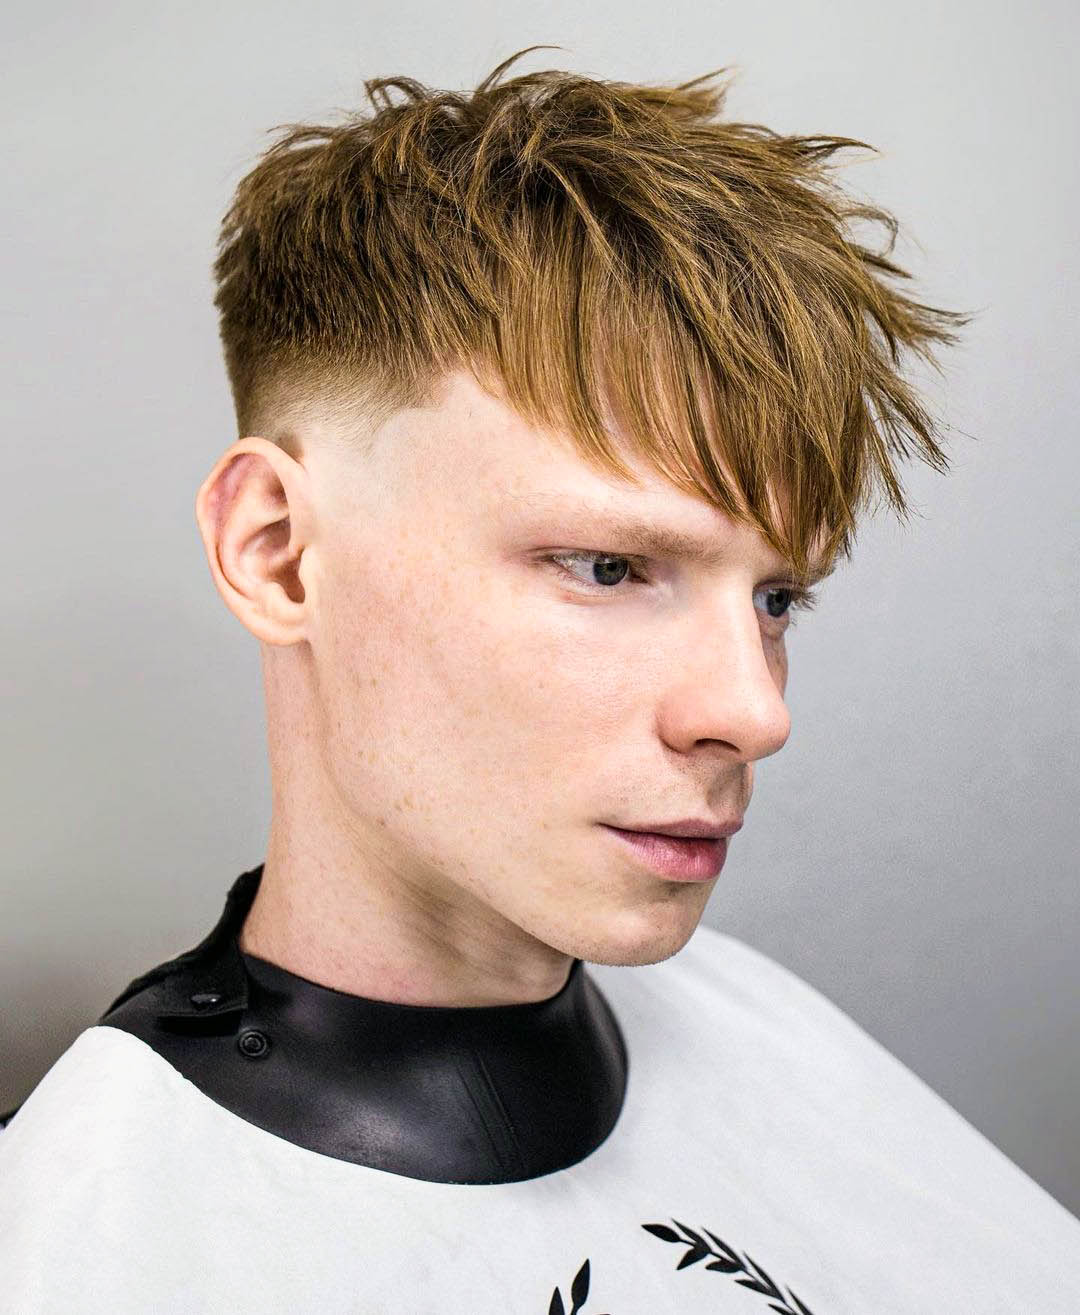 Textured Long Angular Fringe with Low Fade